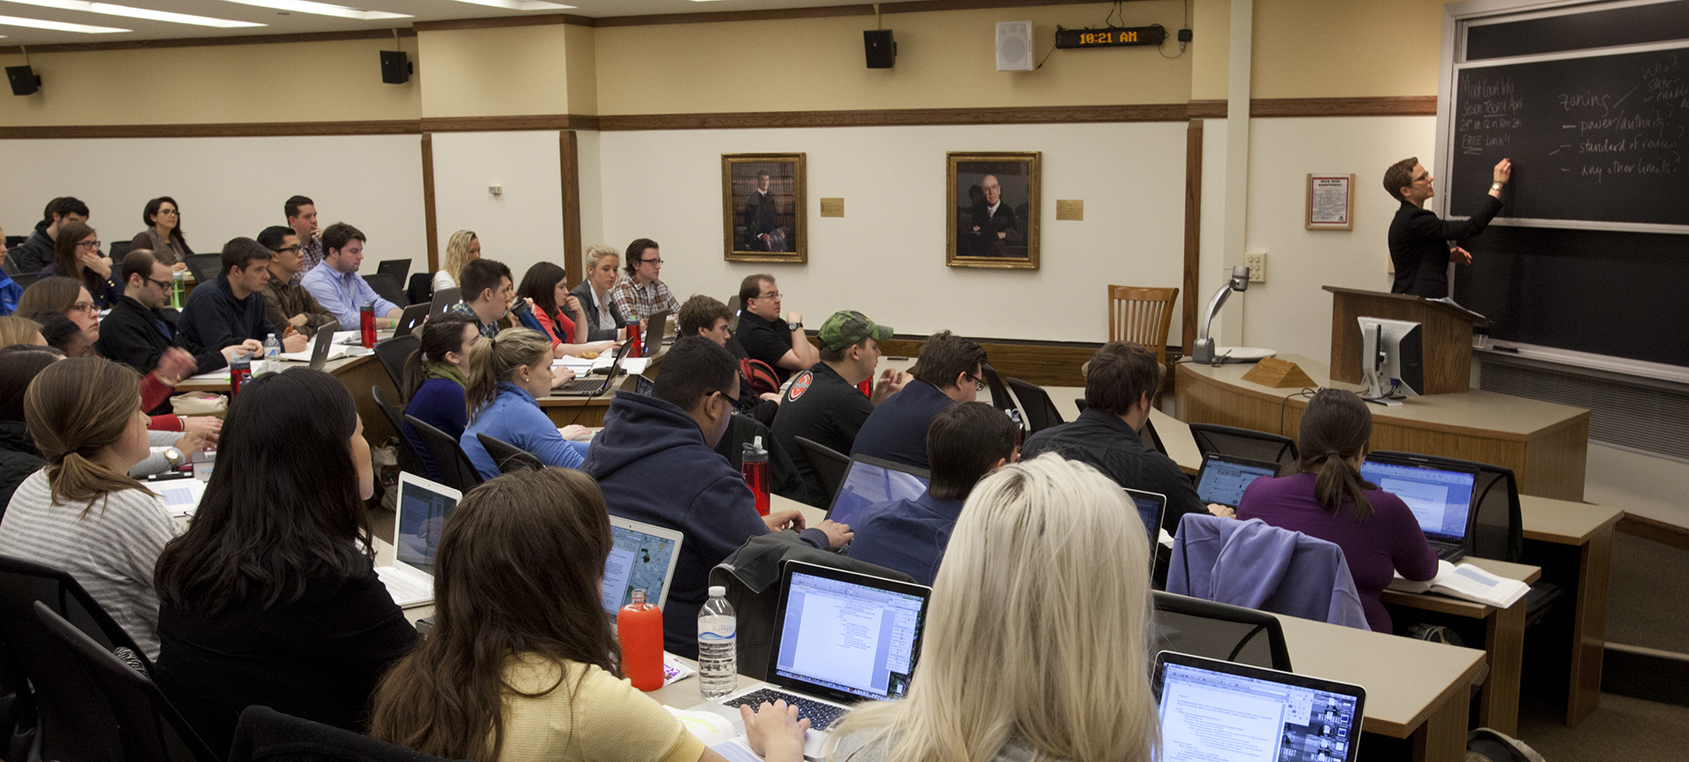 Whether students access the Wi-Fi network for social purposes or academic purposes, a stable Wi-Fi connection at educational institutions is a service that most students rely on. - DePaul University - College of Law